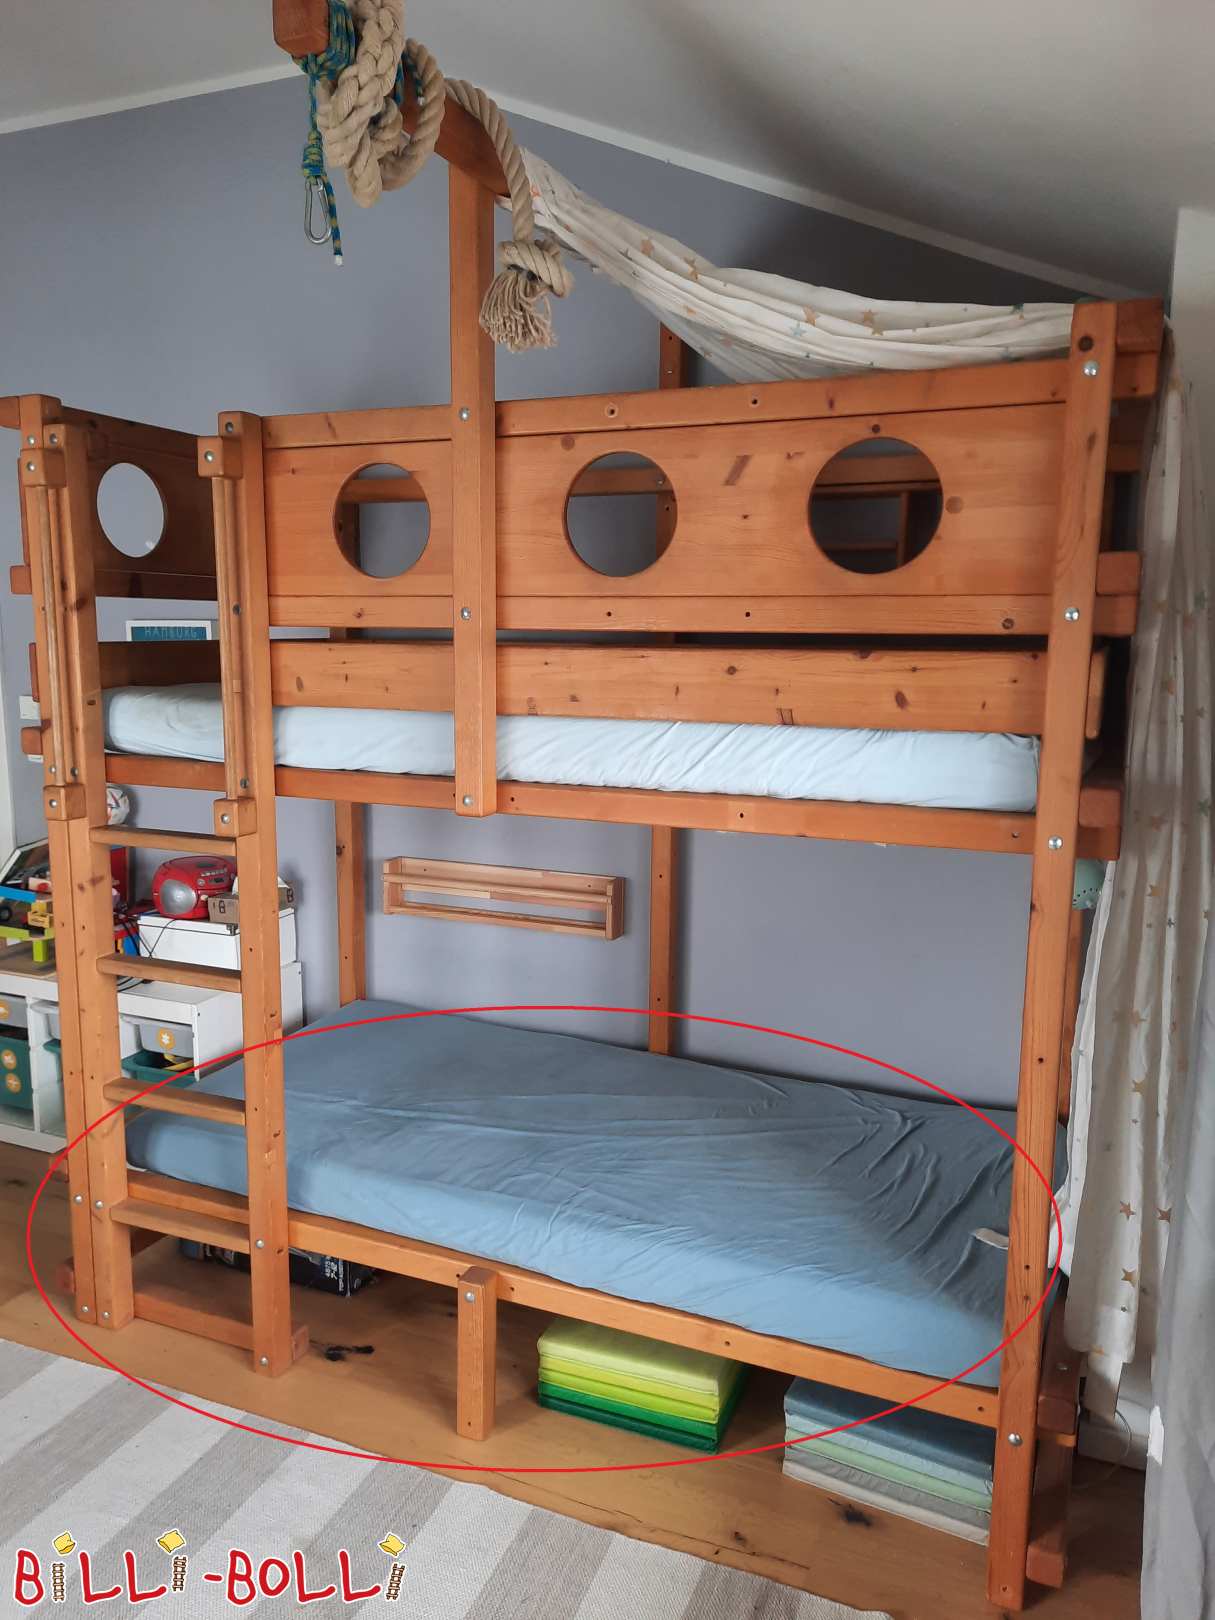 Additional sleeping level for loft bed (Category: Accessories/extension parts pre-owned)